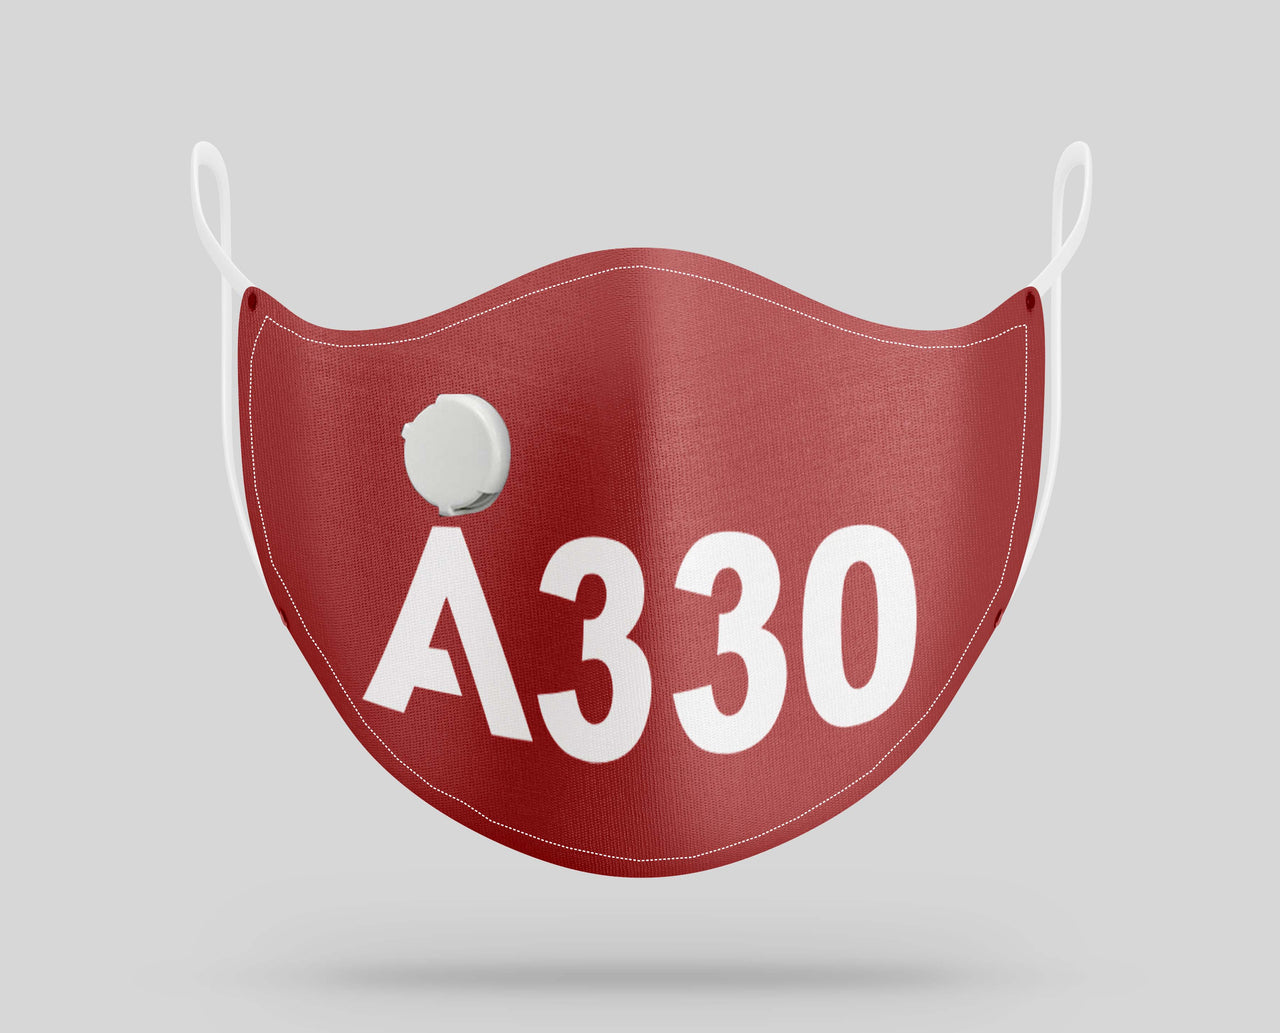 Airbus A330 Text Designed Face Masks